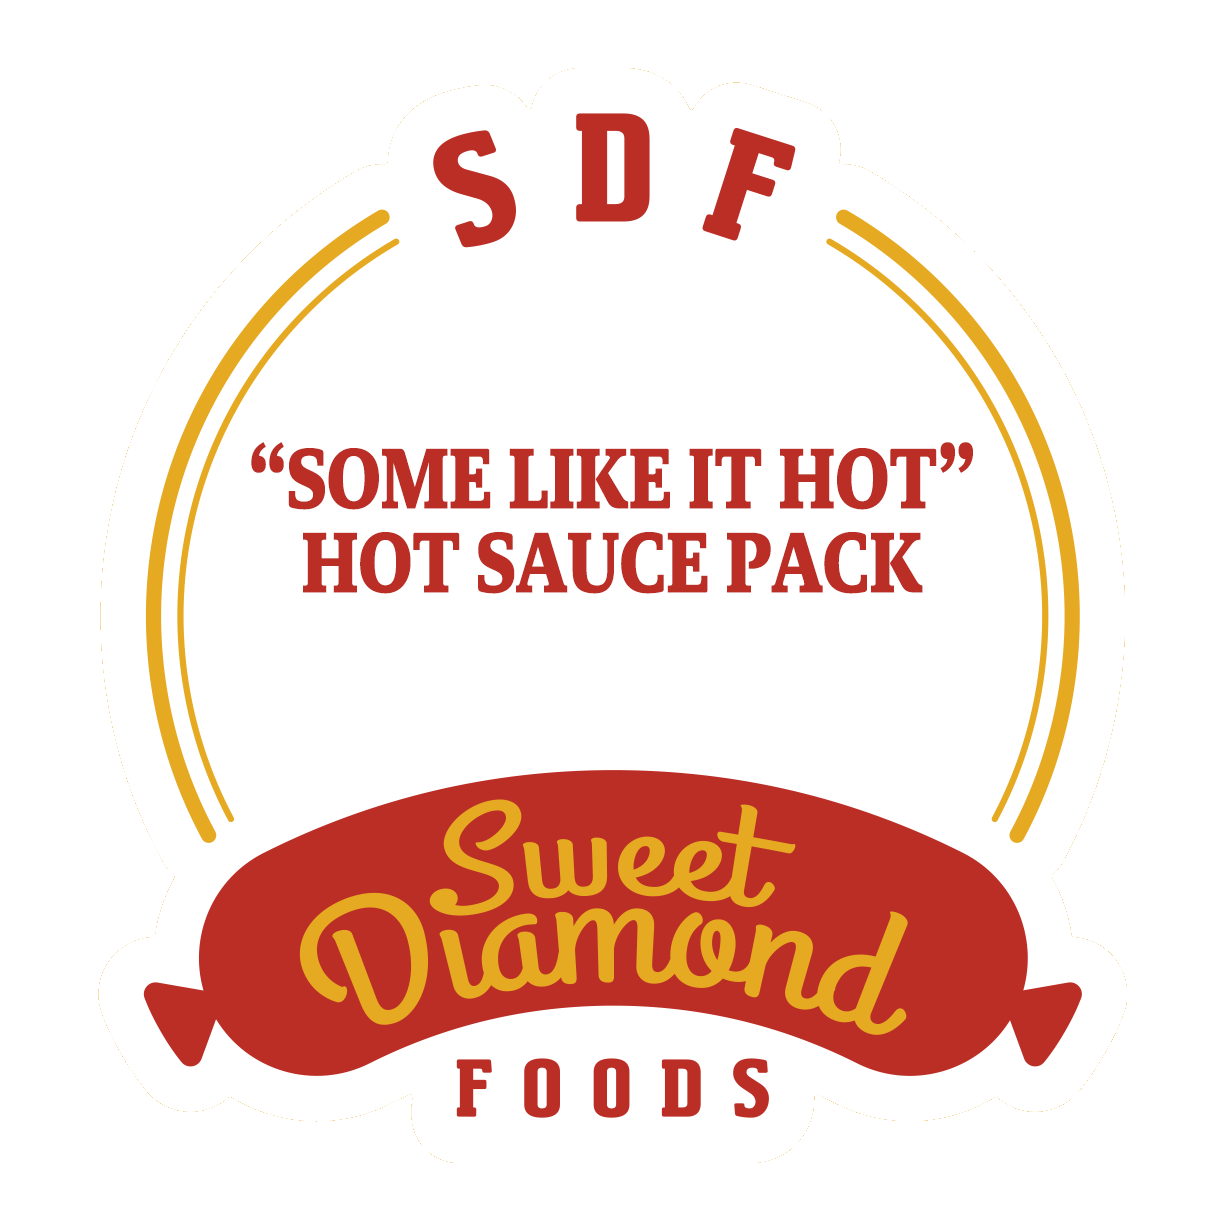 "Some Like It Hot" Hot Sauce Pack